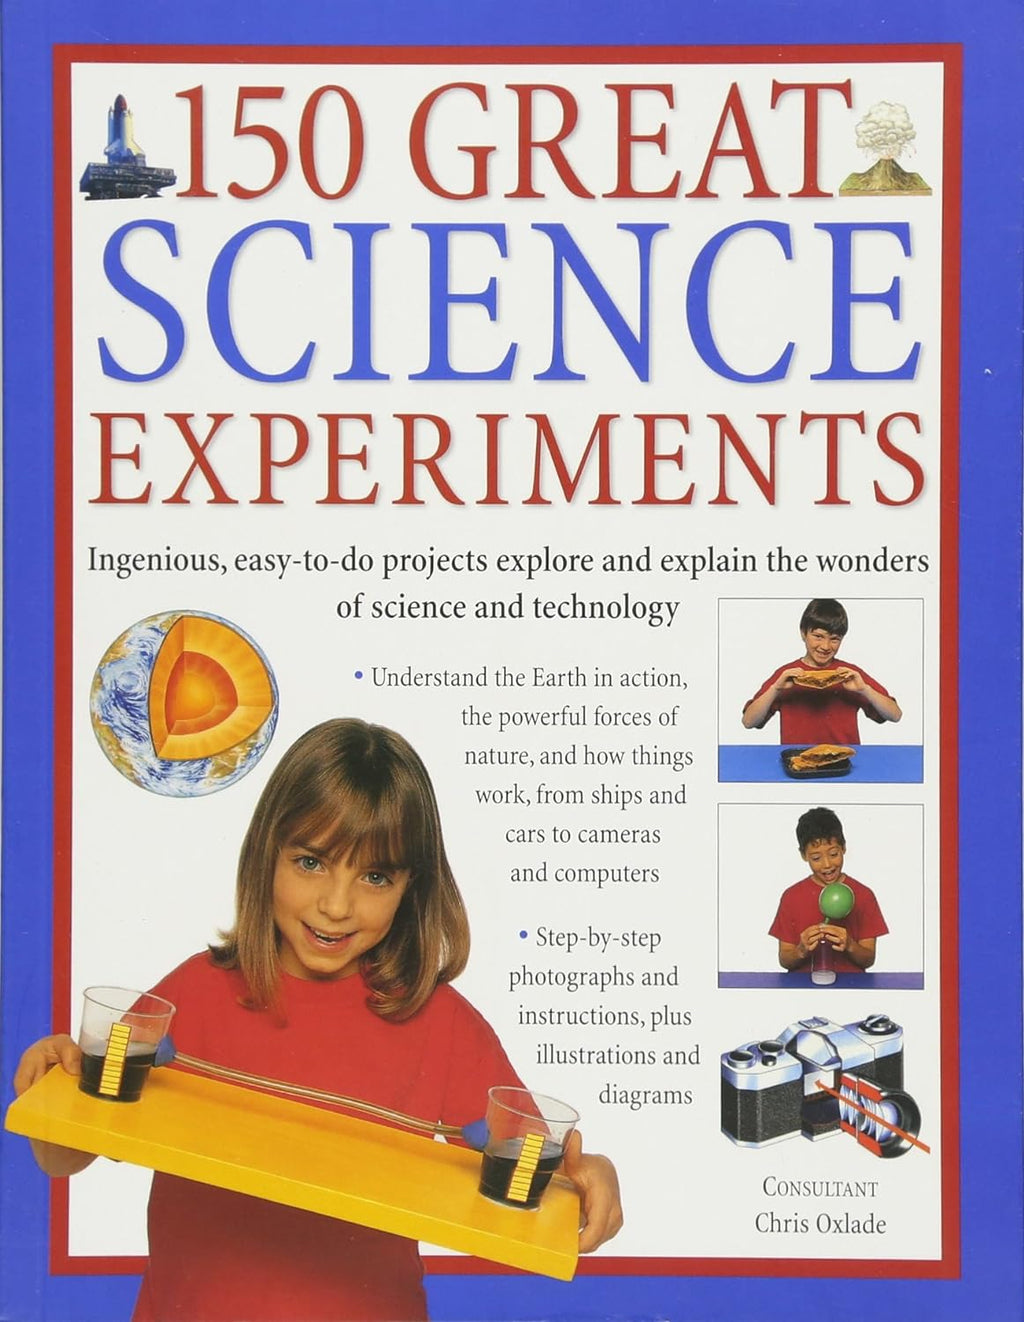 150 Great Science Experiments